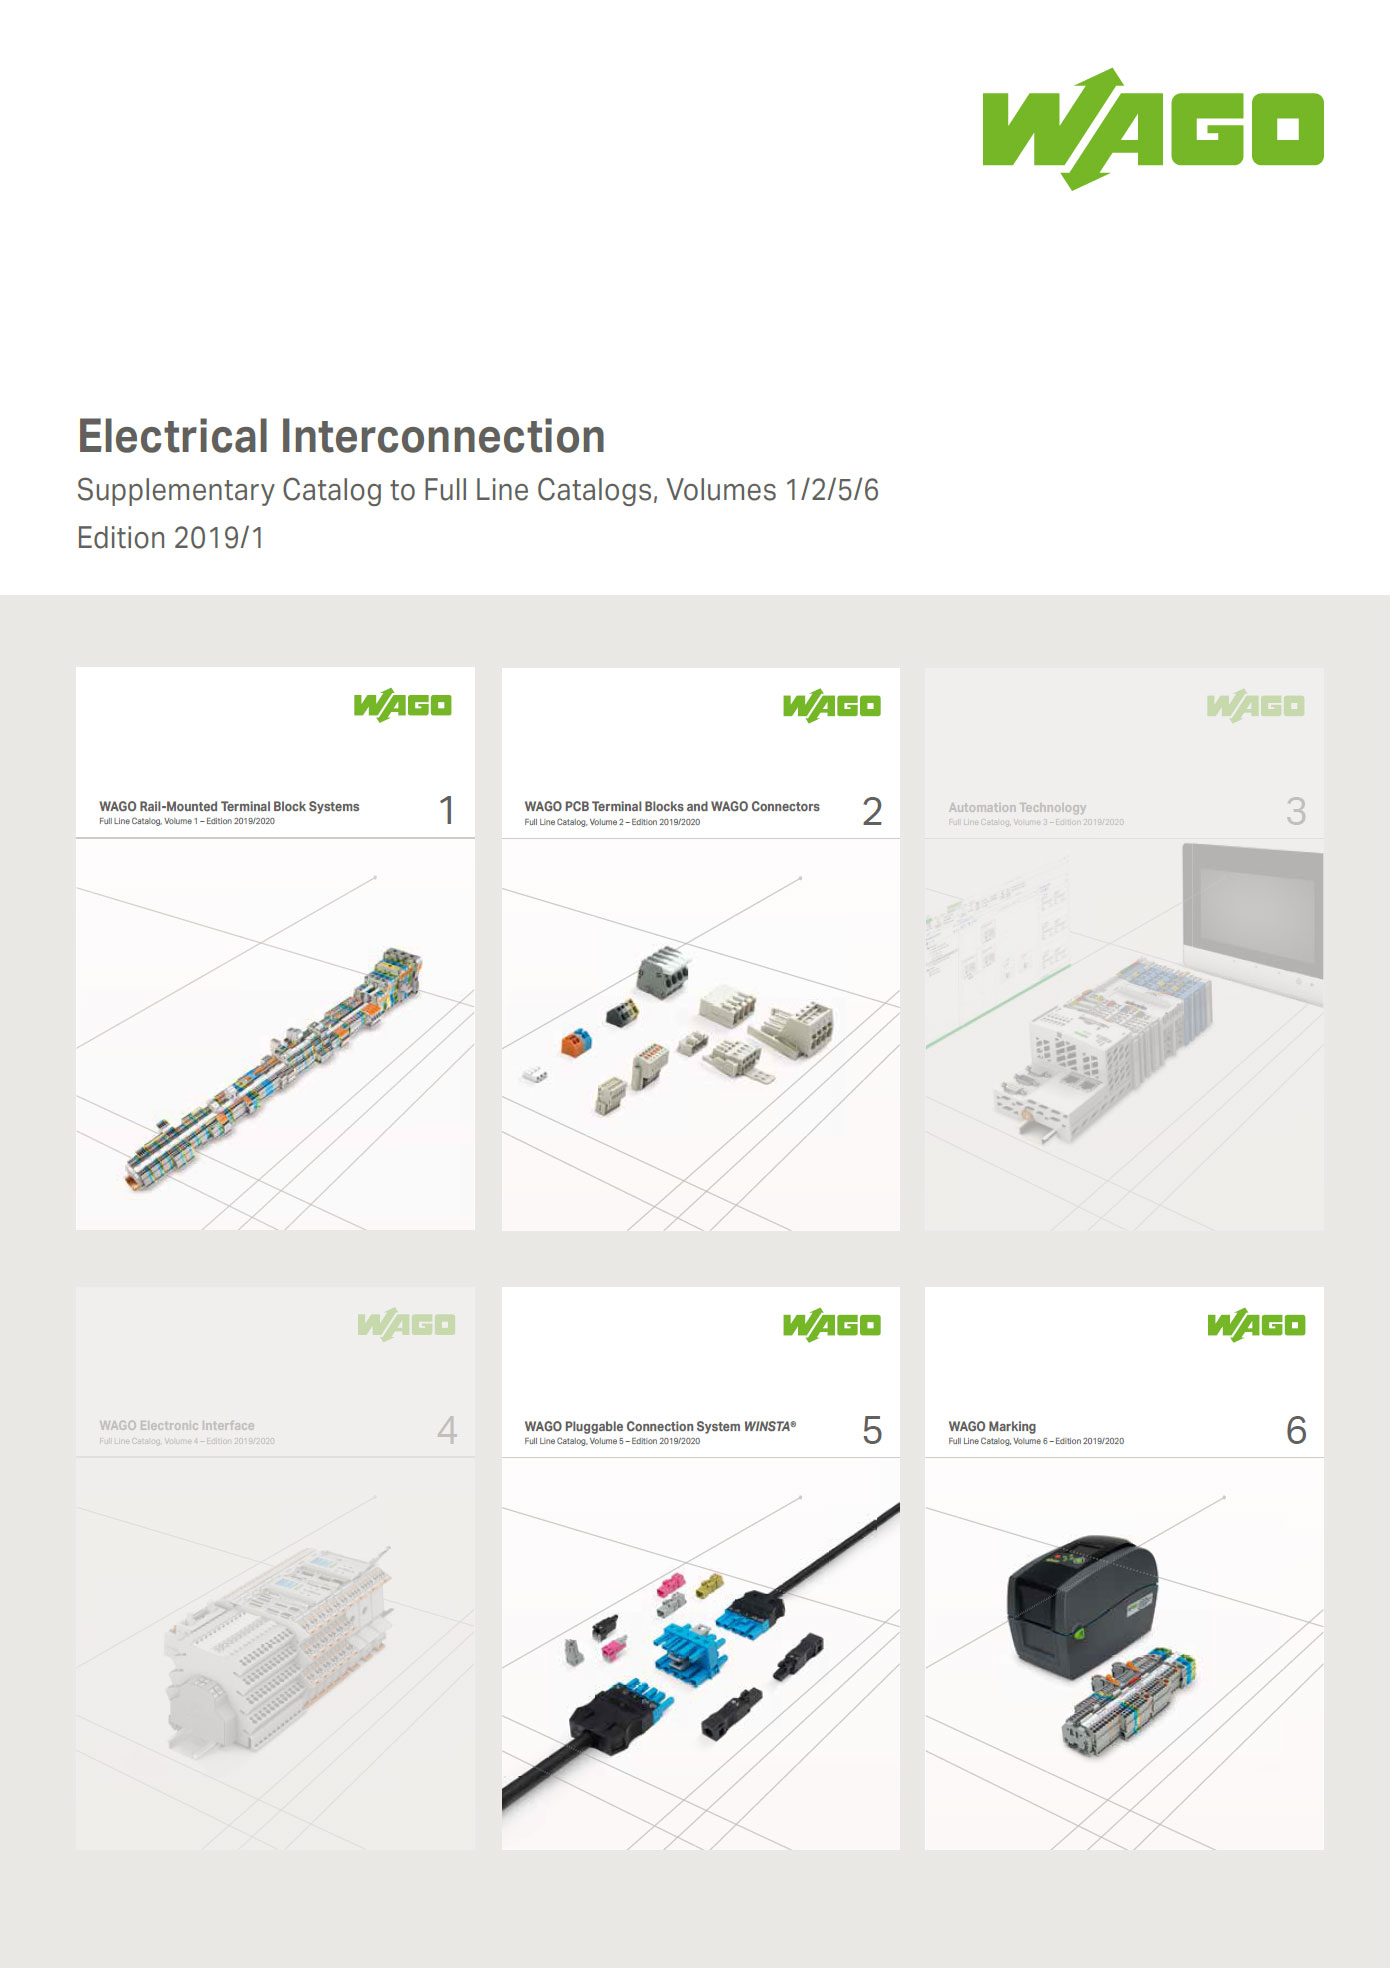 Wago Electrical Interconnection Cover